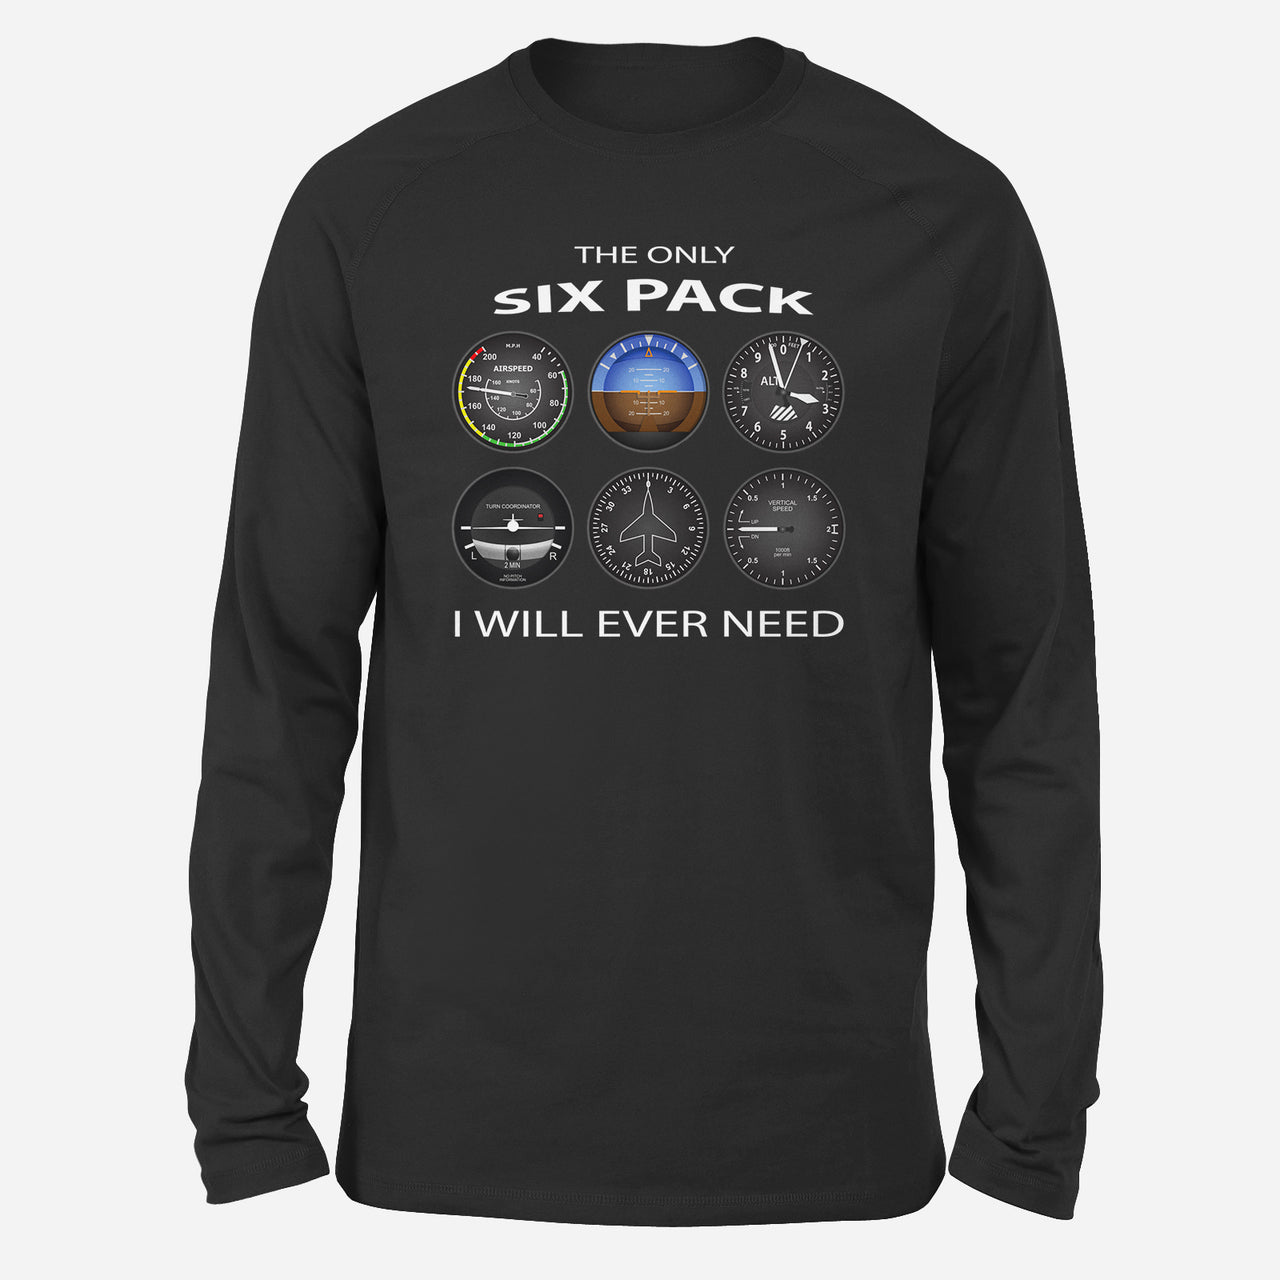 The Only Six Pack I Will Ever Need Designed Long-Sleeve T-Shirts